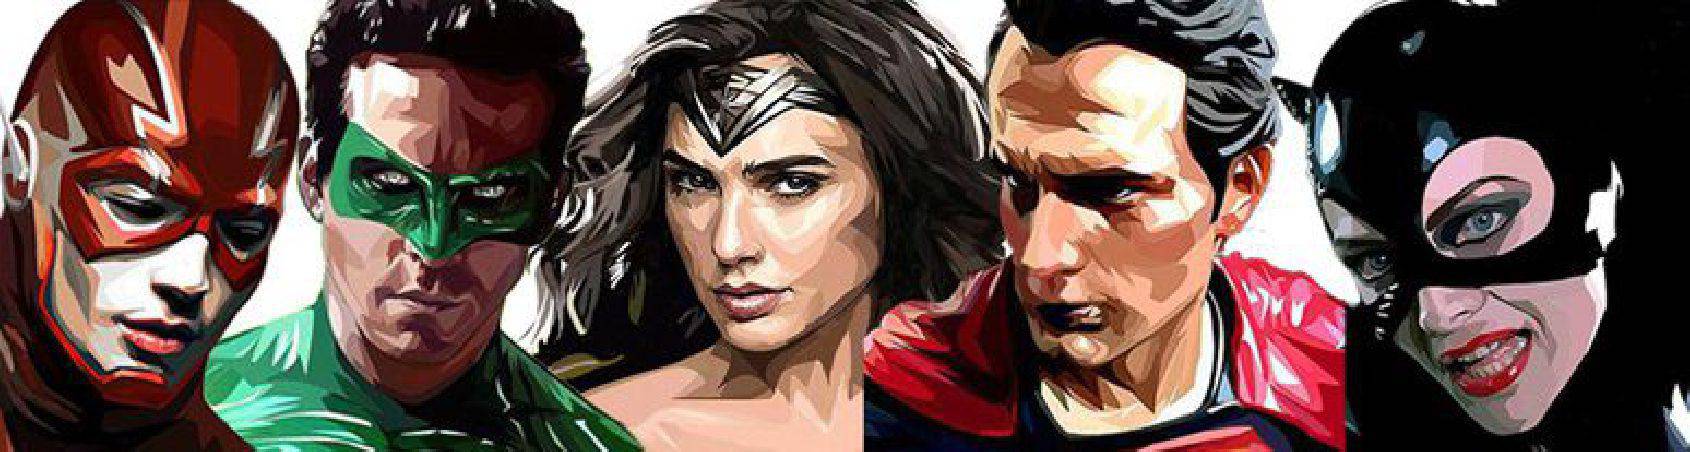 PopArt style paintings - DC comics characters - To buy